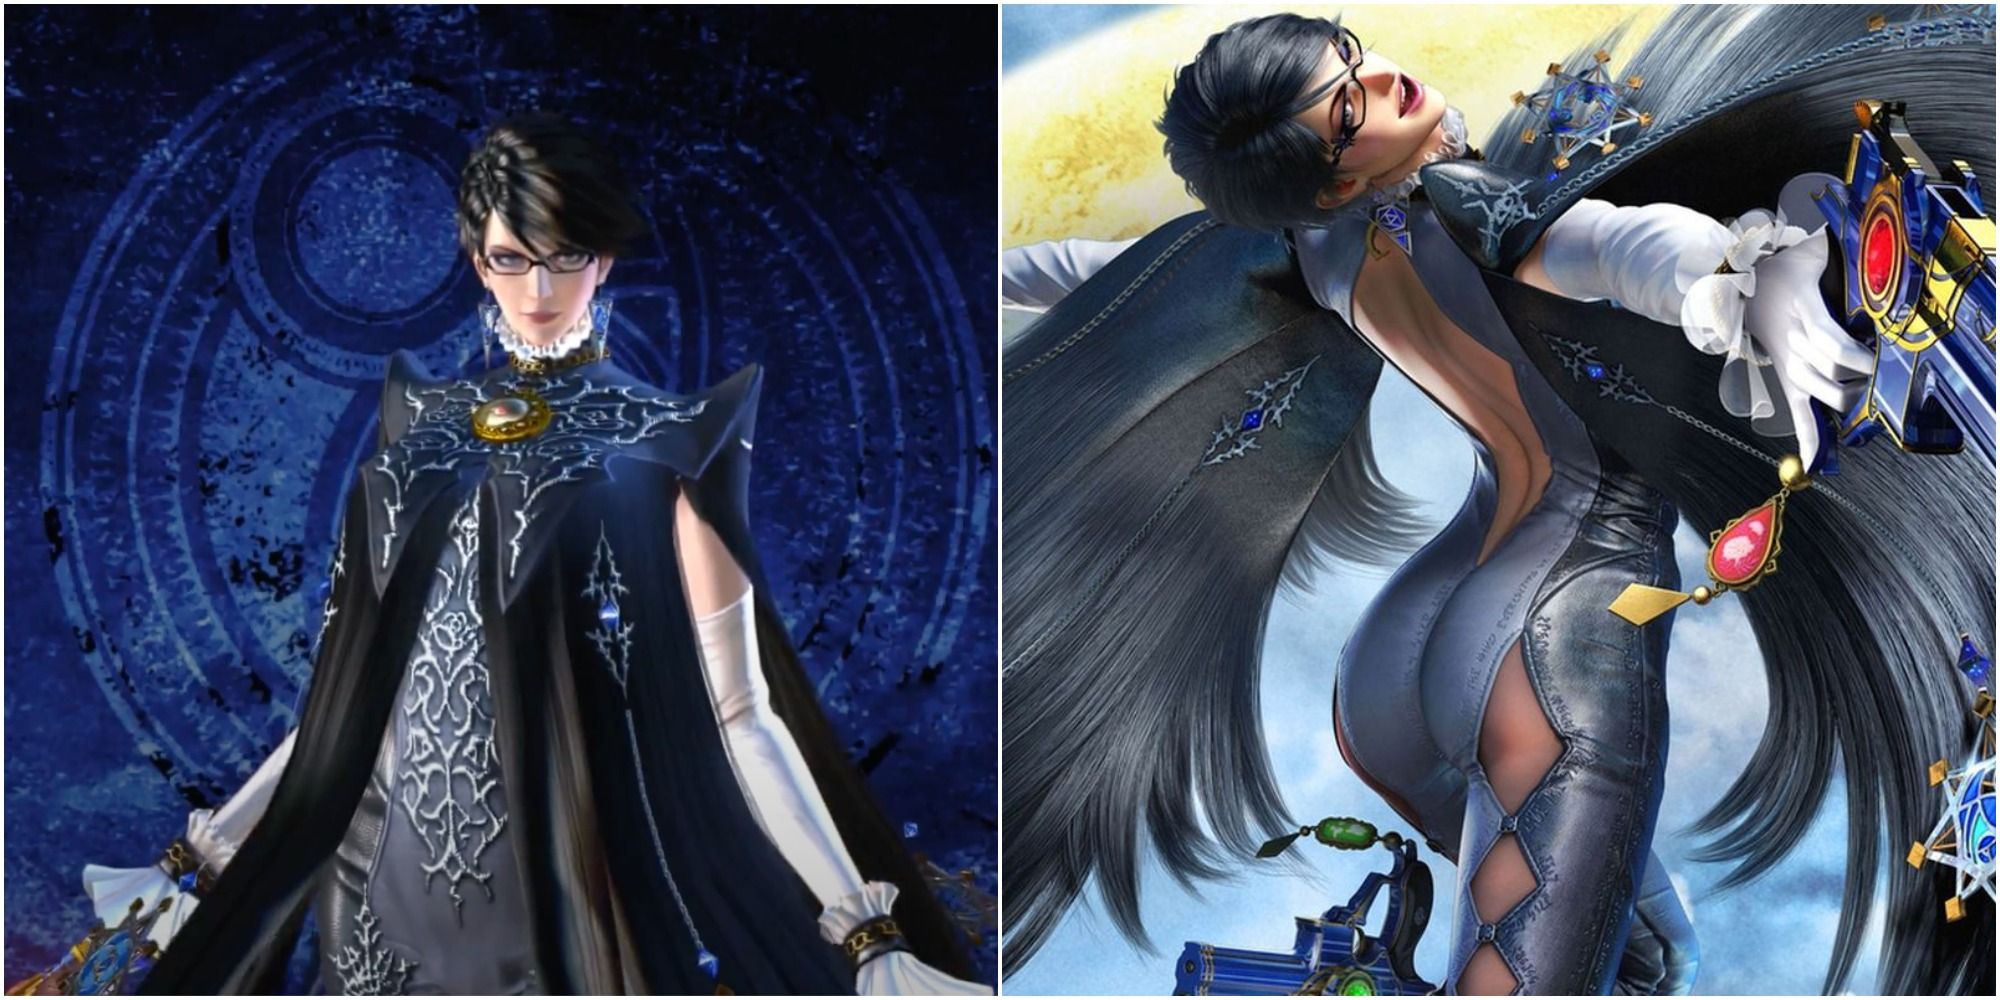 Bayonetta 2 default outfit "The Famed Witch"